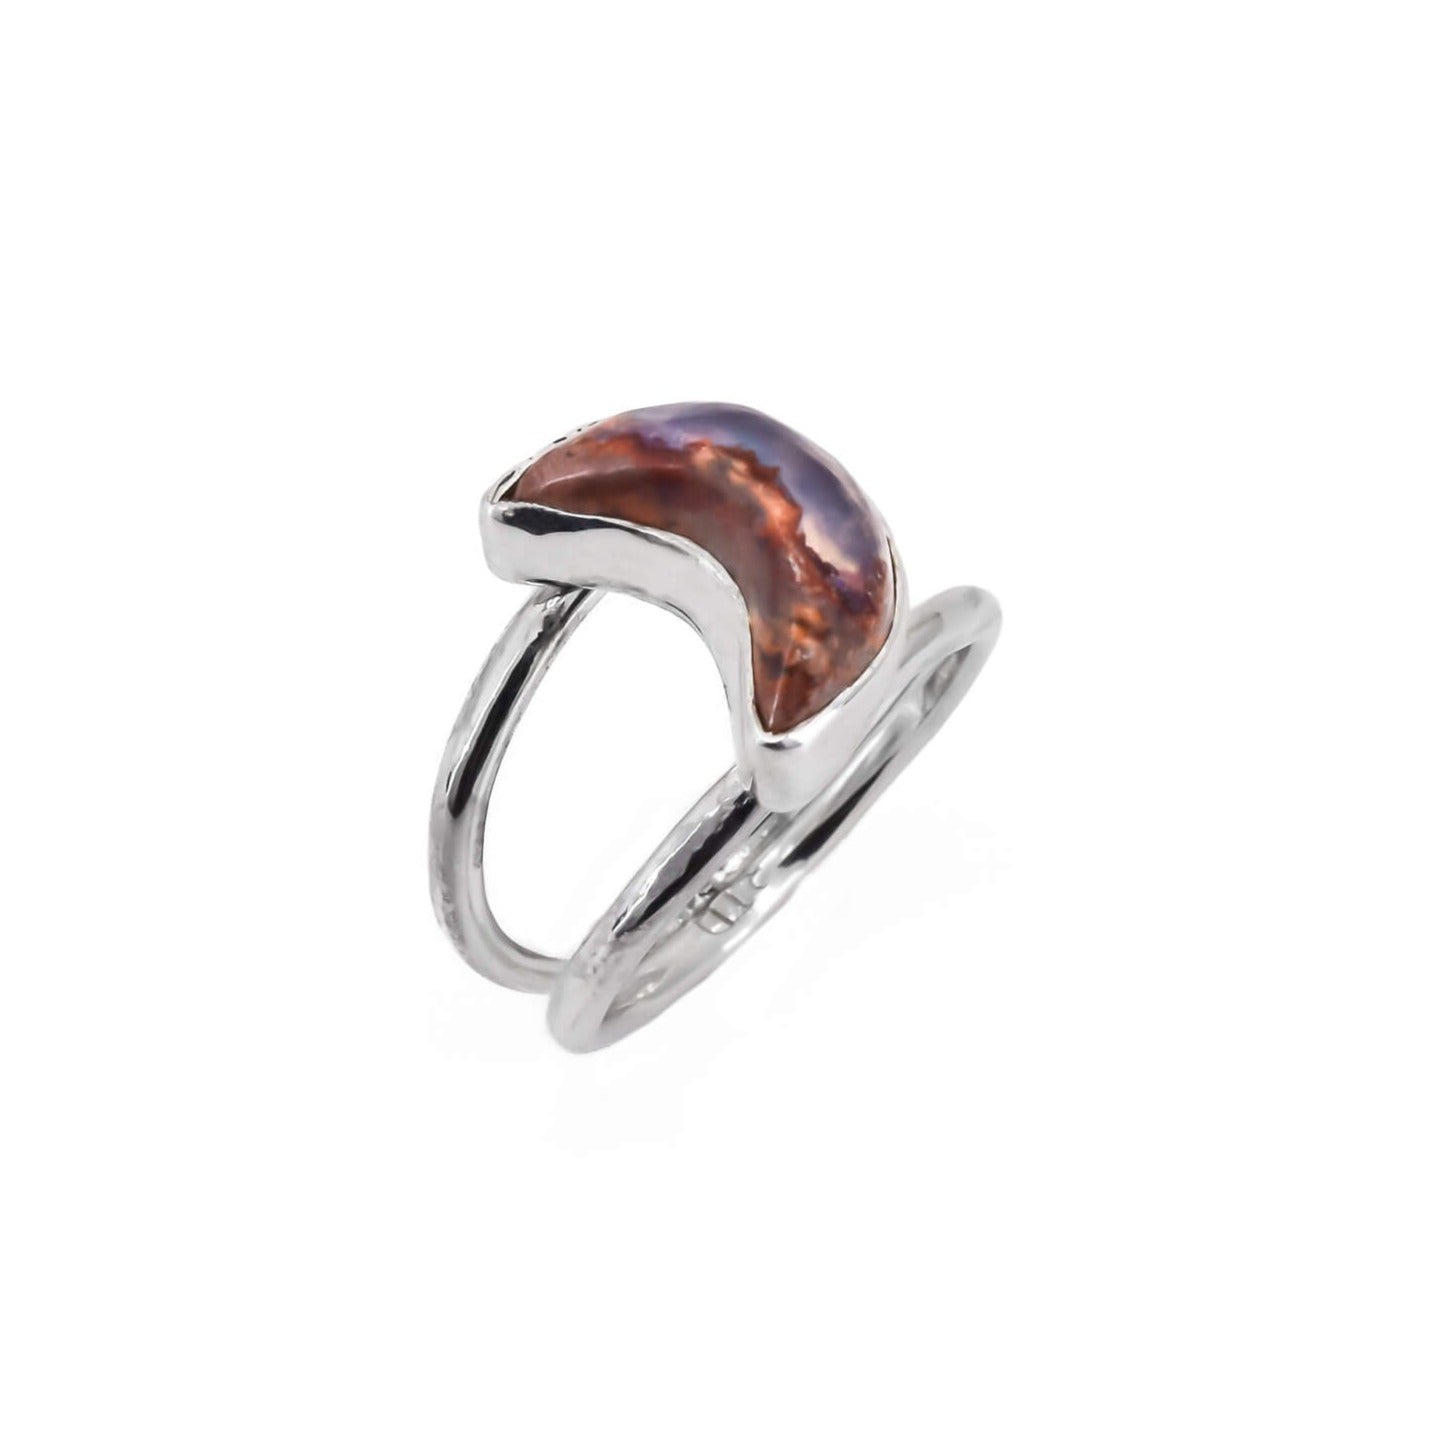 Crescent moon cantera opal ring in sterling silver with a double ring band.